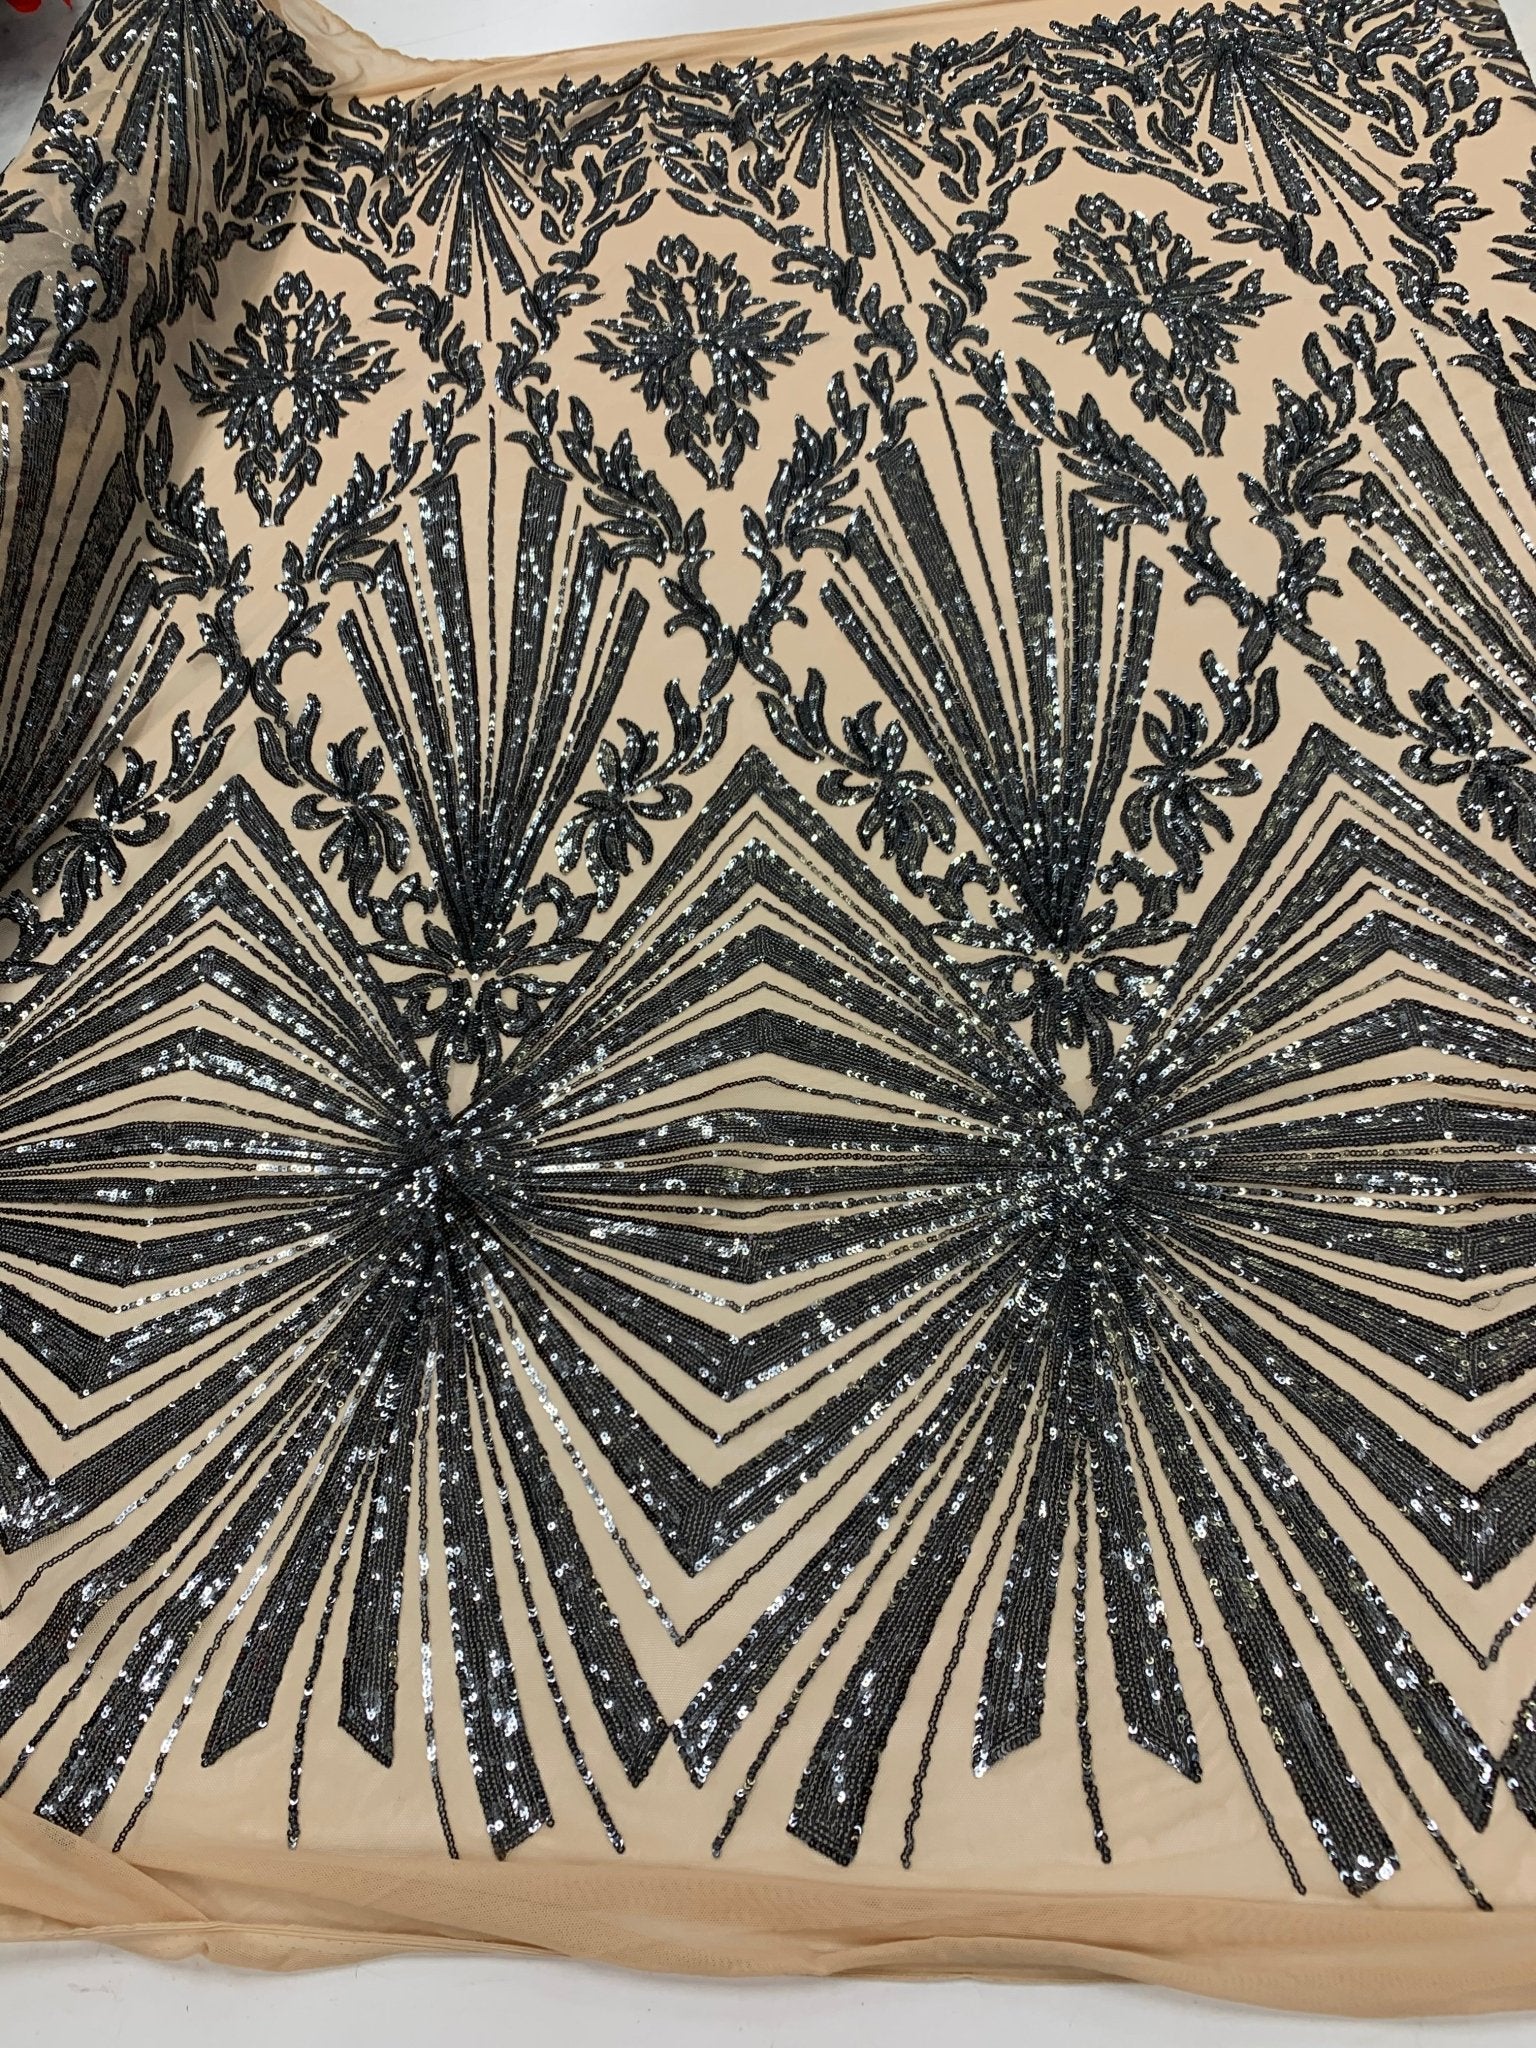 French Embroidery Stretch Sequins Fabric By The Yard on a Mesh LaceICEFABRICICE FABRICSGrayFrench Embroidery Stretch Sequins Fabric By The Yard on a Mesh Lace ICEFABRIC Black on Nude Mesh